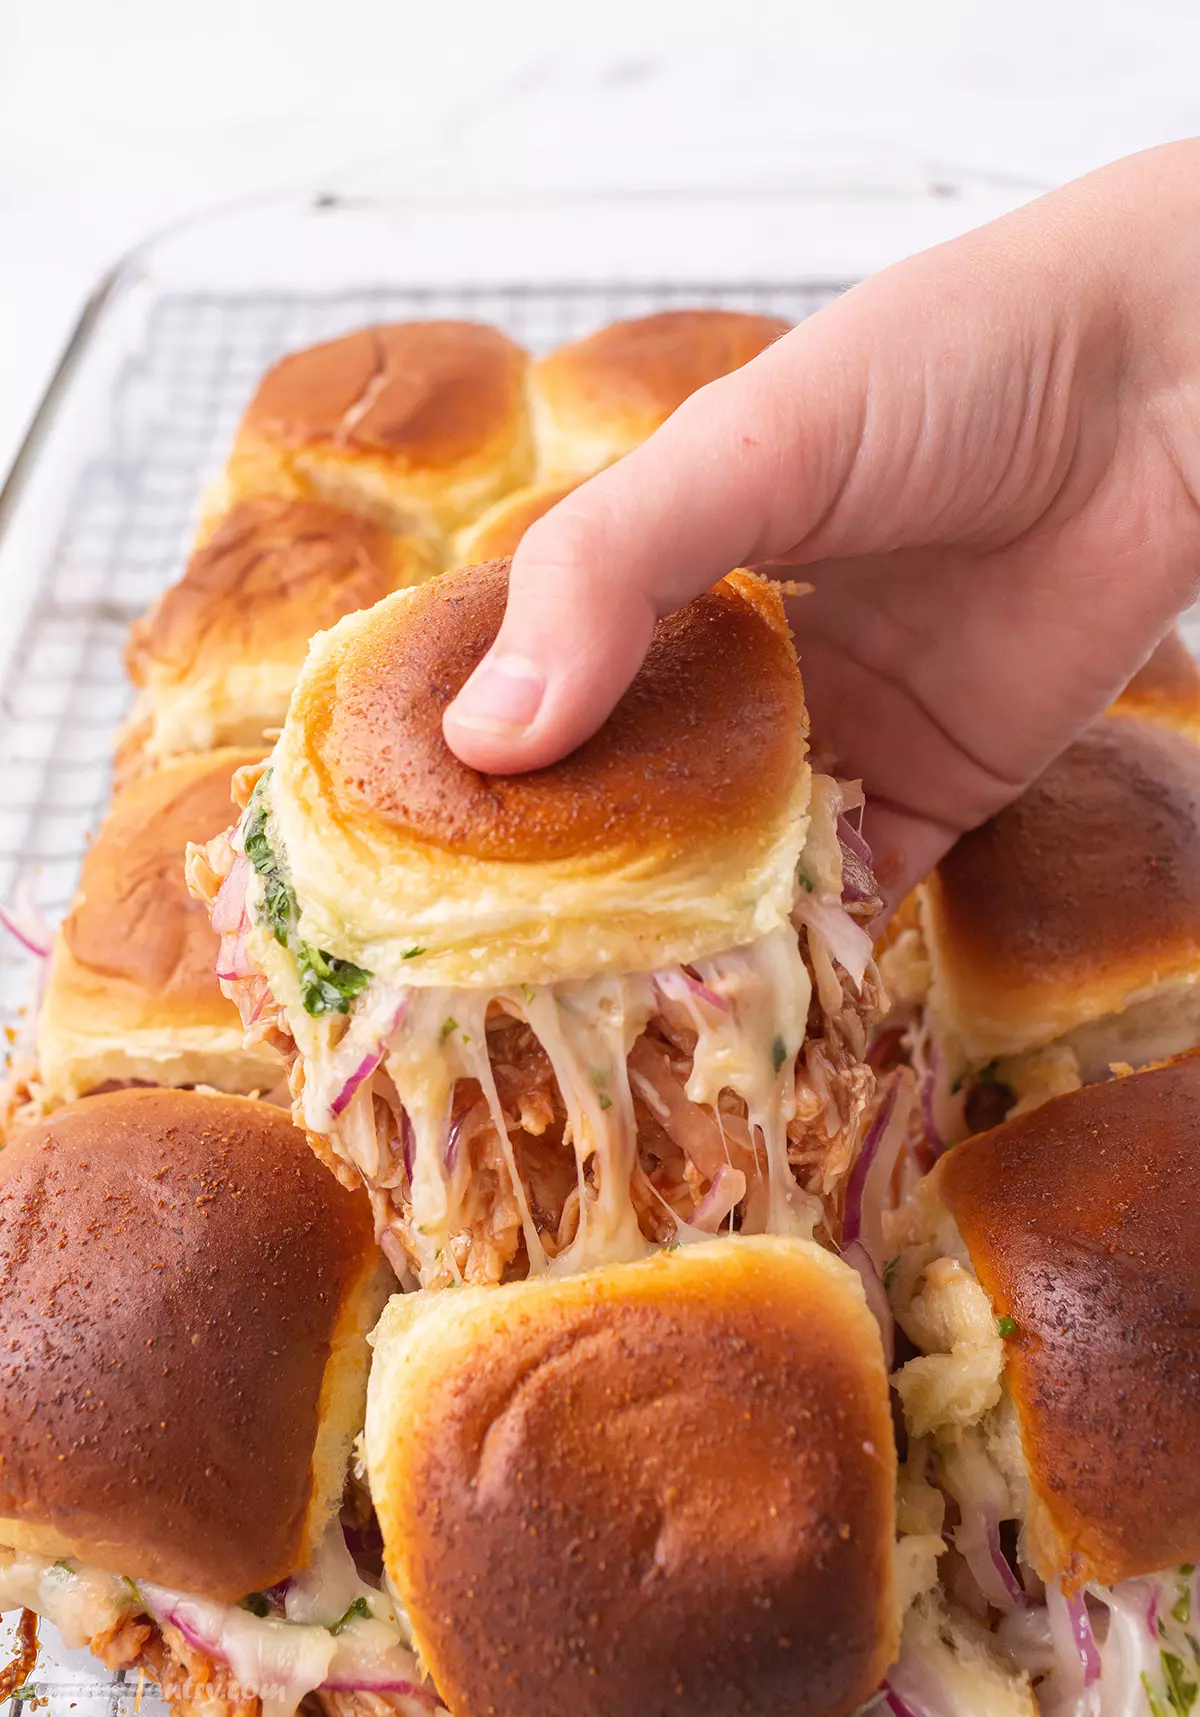 A hand pulling out a slider sandwich from a tray.